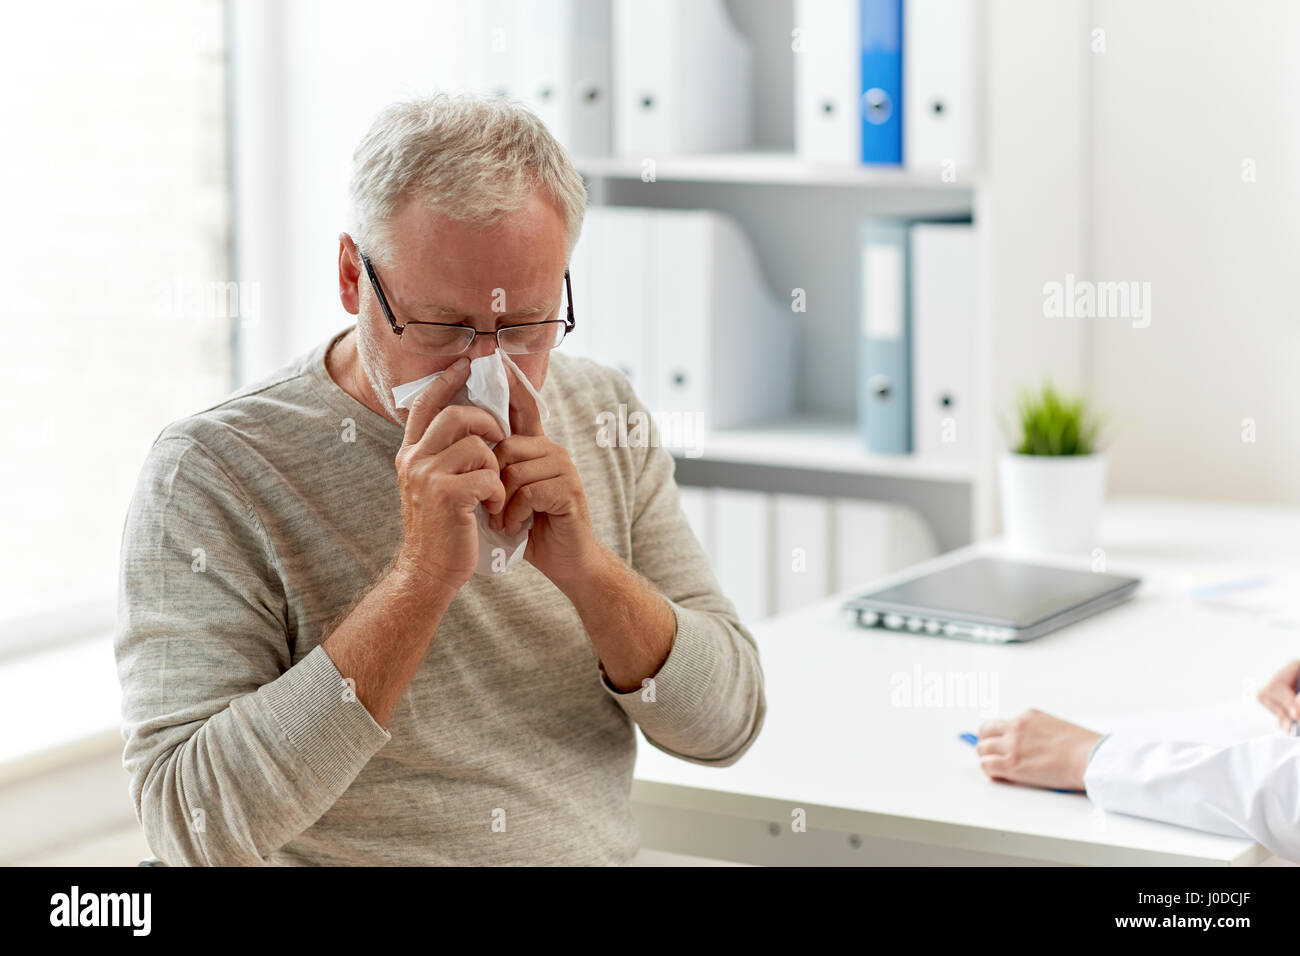 senior man blowing nose with napkin at hospital Stock Photo